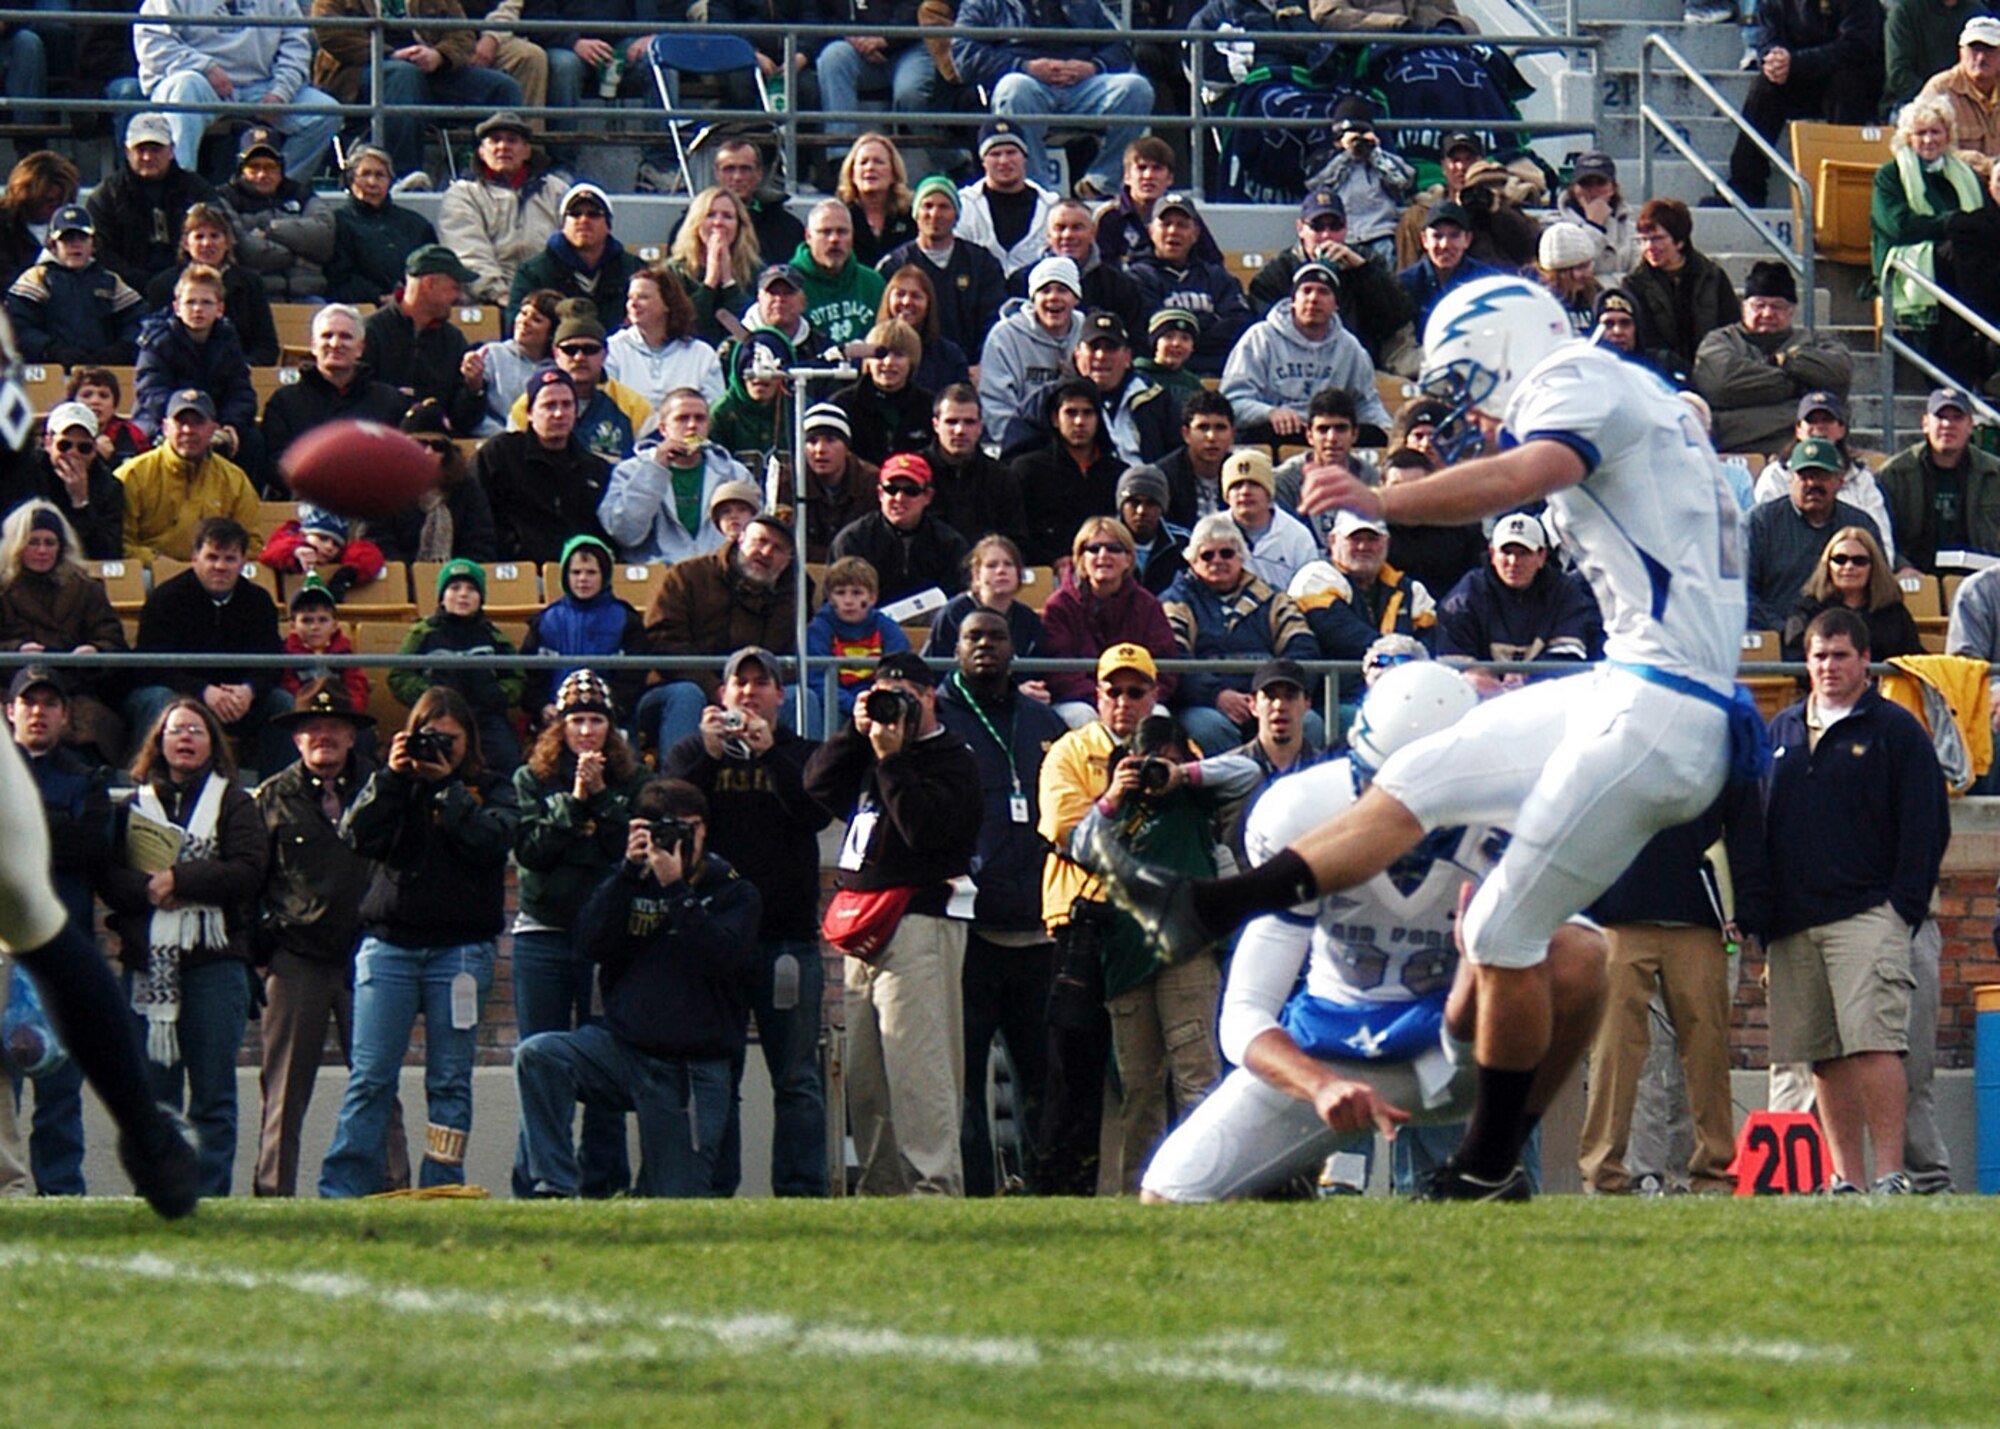 U.S. Air Force Academy Falcon kicker Ryan Harrison boots out of the hold of Brandon Geyer as sideline photographers get the shot during Air Force's 41-24 victory over the Fighting Irish Nov. 10 at Notre Dame Stadium in Indiana. Harrison accounted for 11 points on two field goals and five points after touchdown. (U.S. Air Force photo/Staff Sgt. Monte Volk) 
